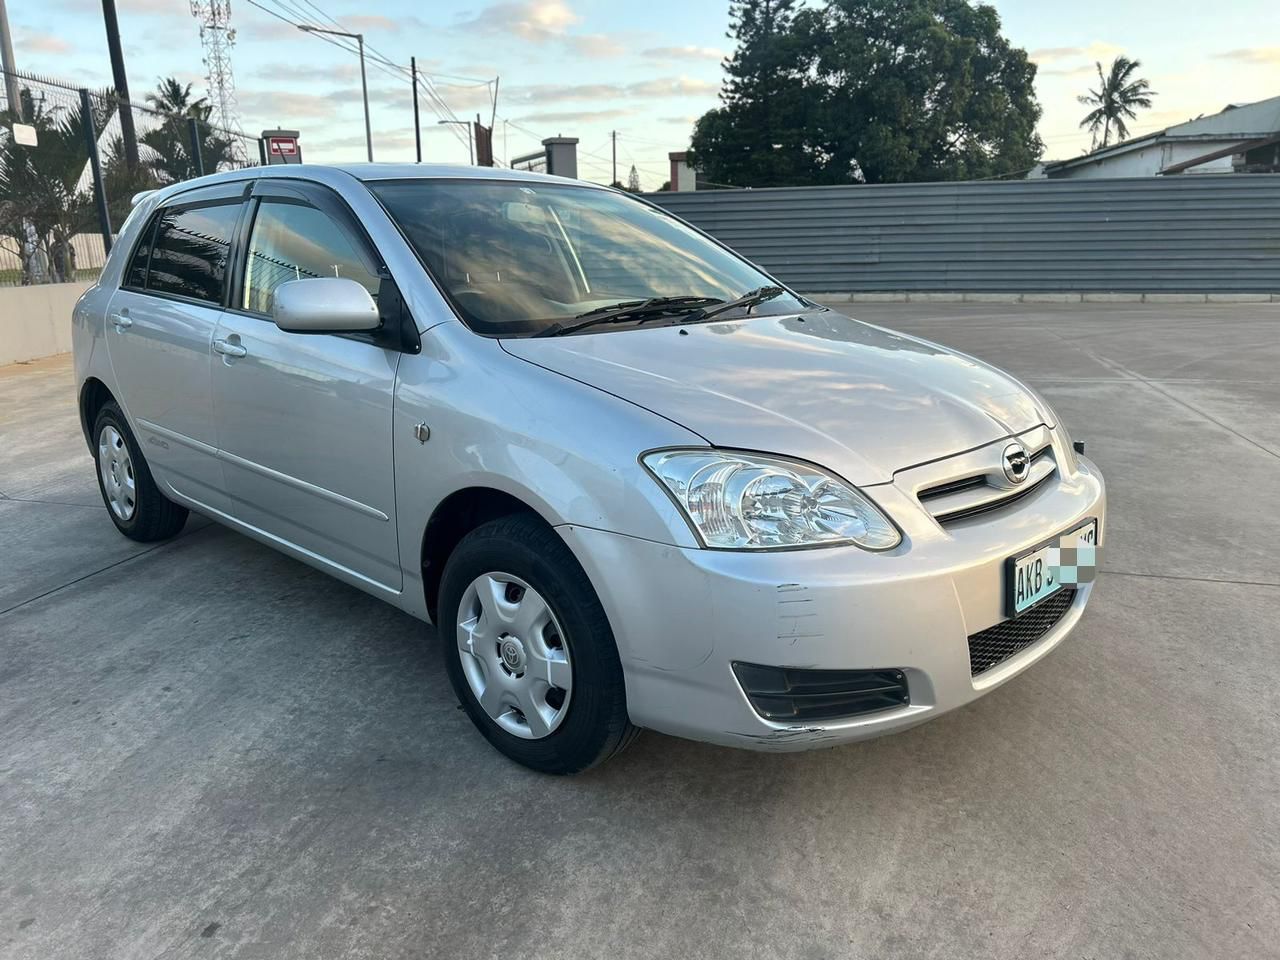 Toyota RunX For Sale in Maputo at Best Prices | UsedCars.co.mz